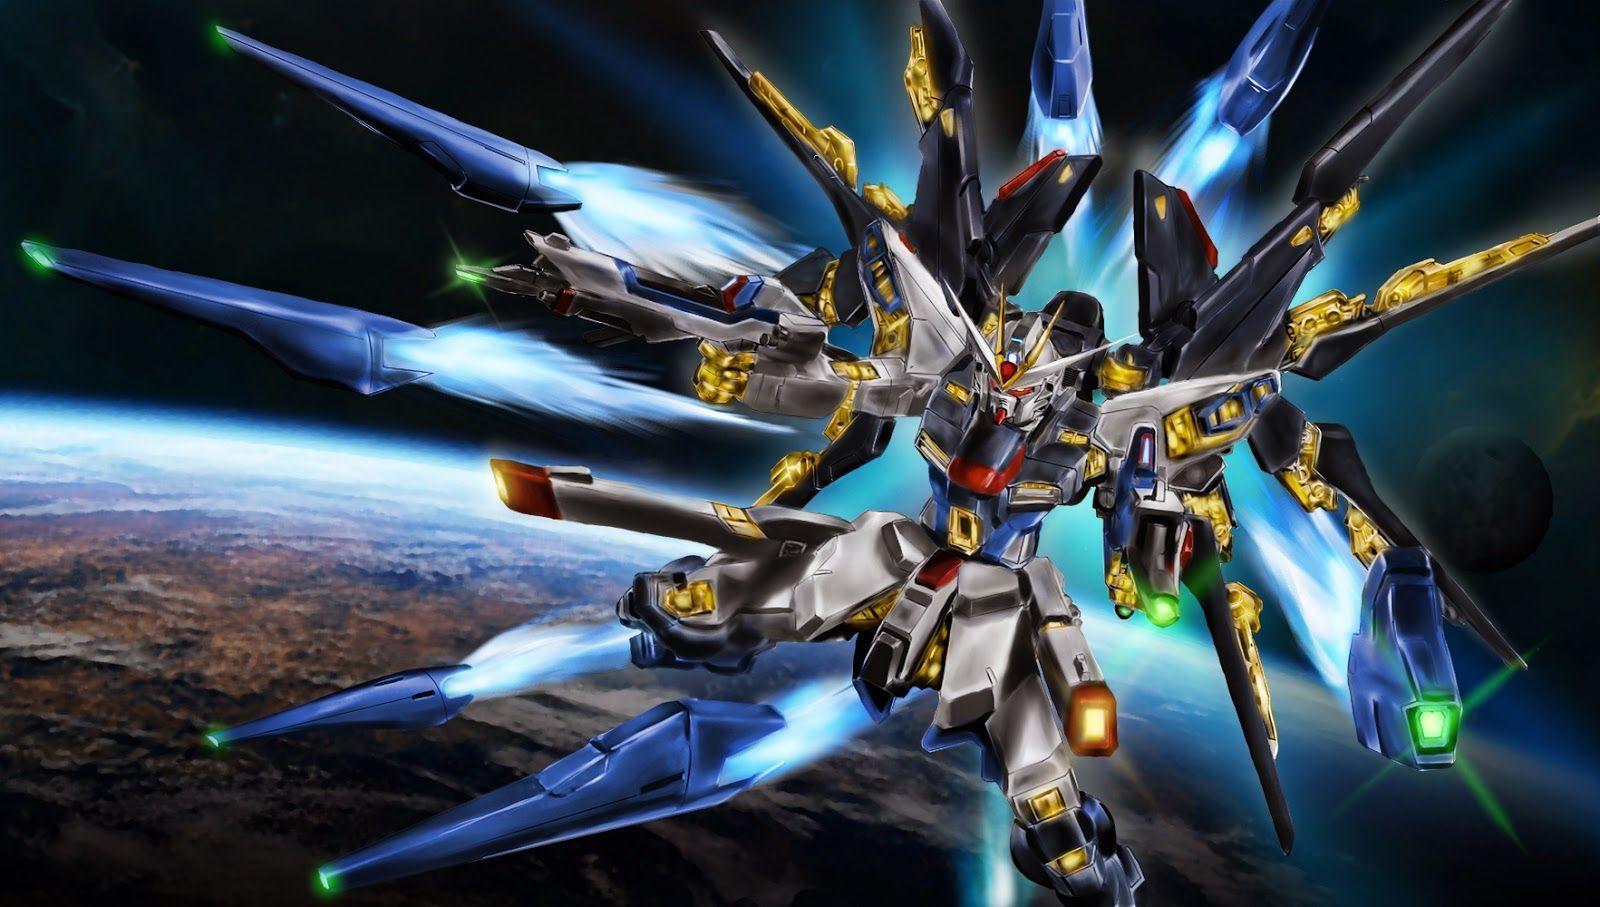 Strike Freedom Wallpapers - Top Free Strike Freedom Backgrounds